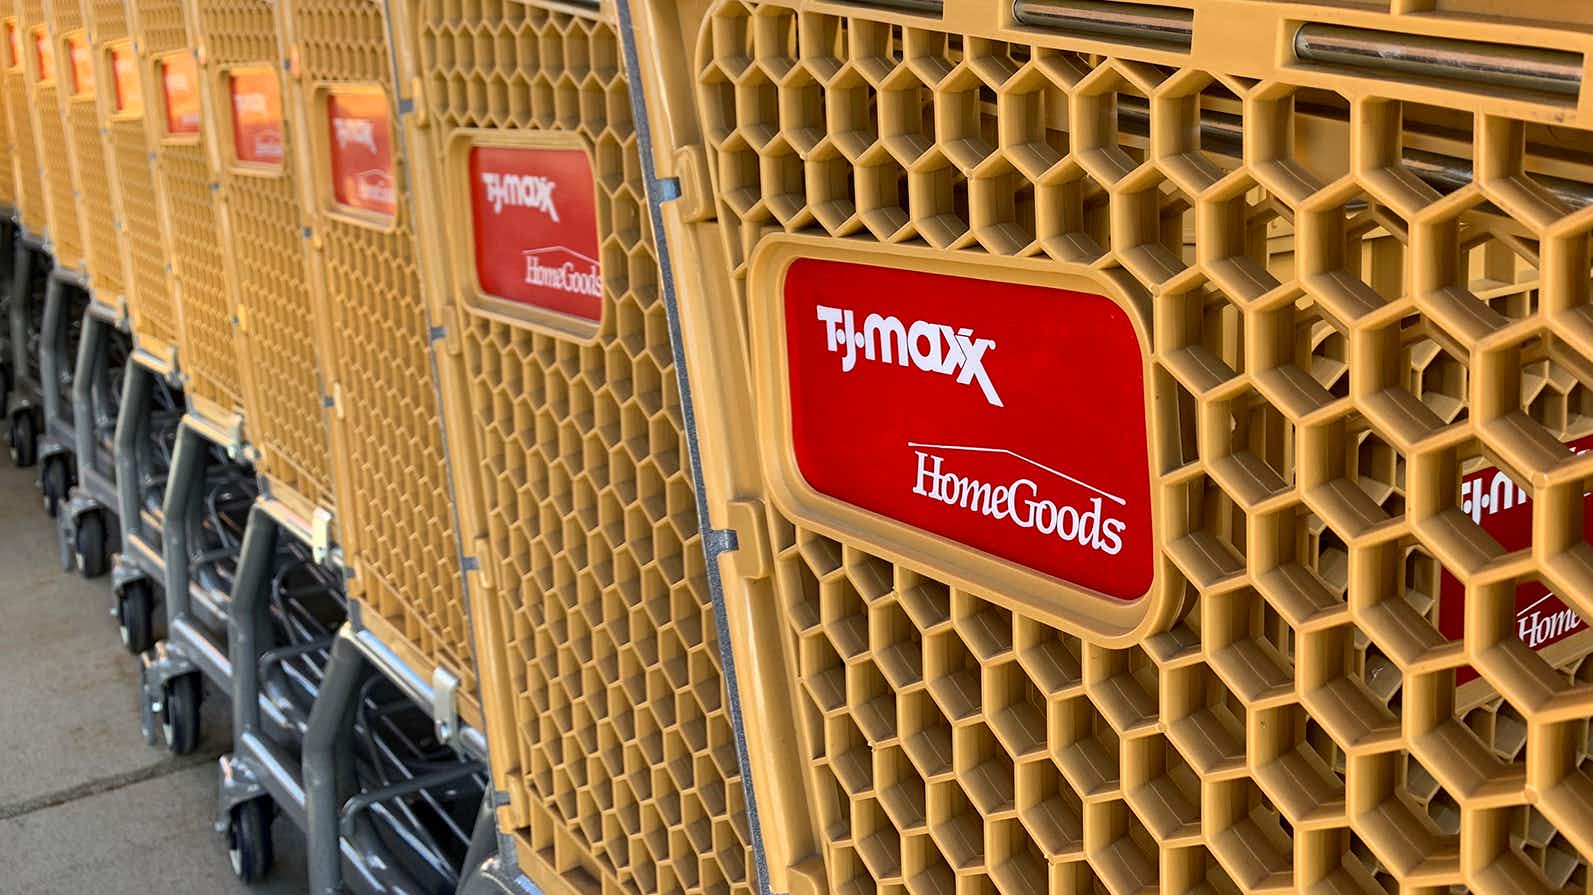 tj maxx and homegoods shopping carts